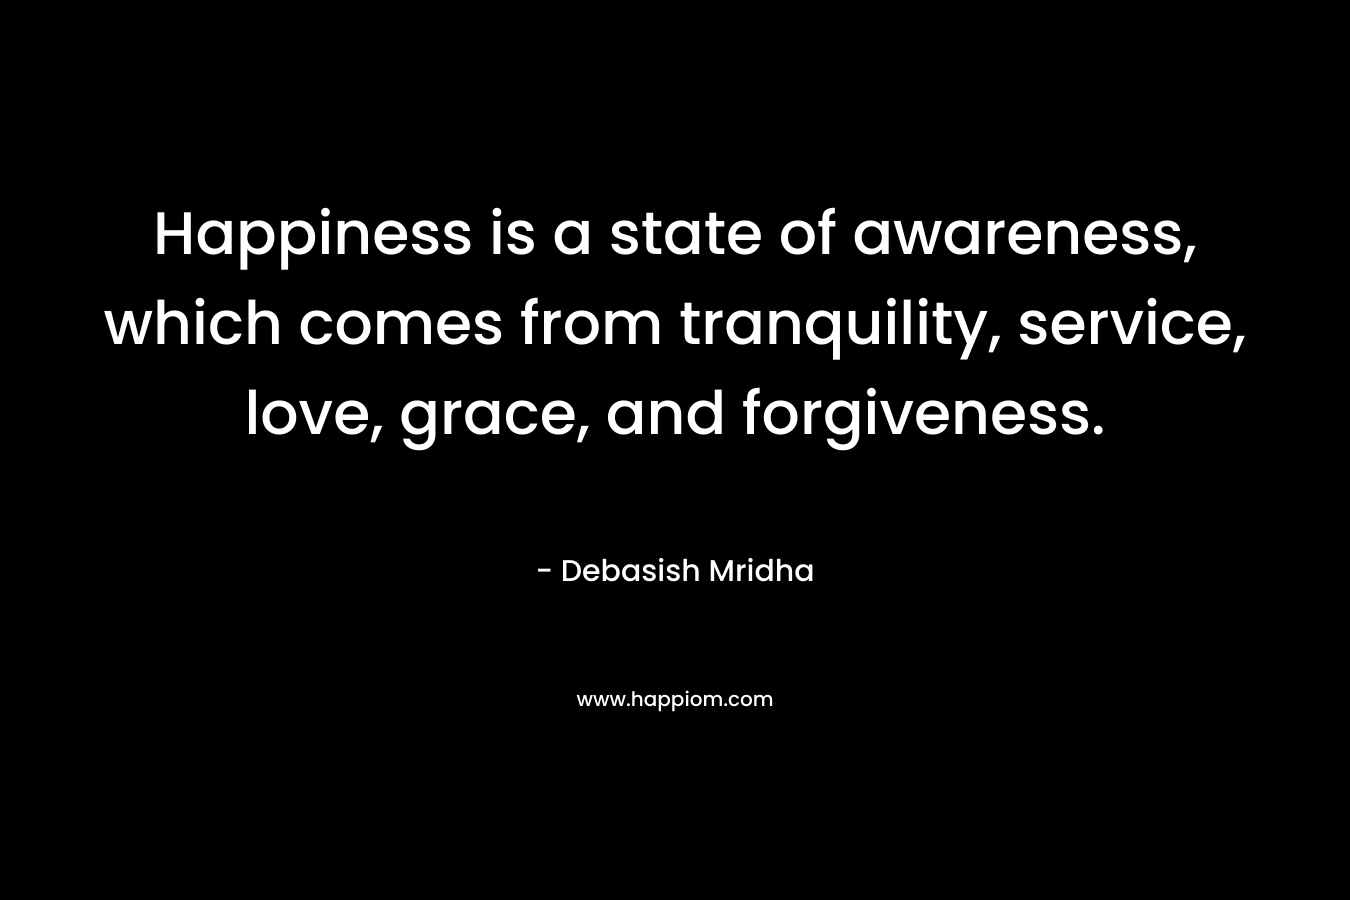 Happiness is a state of awareness, which comes from tranquility, service, love, grace, and forgiveness.